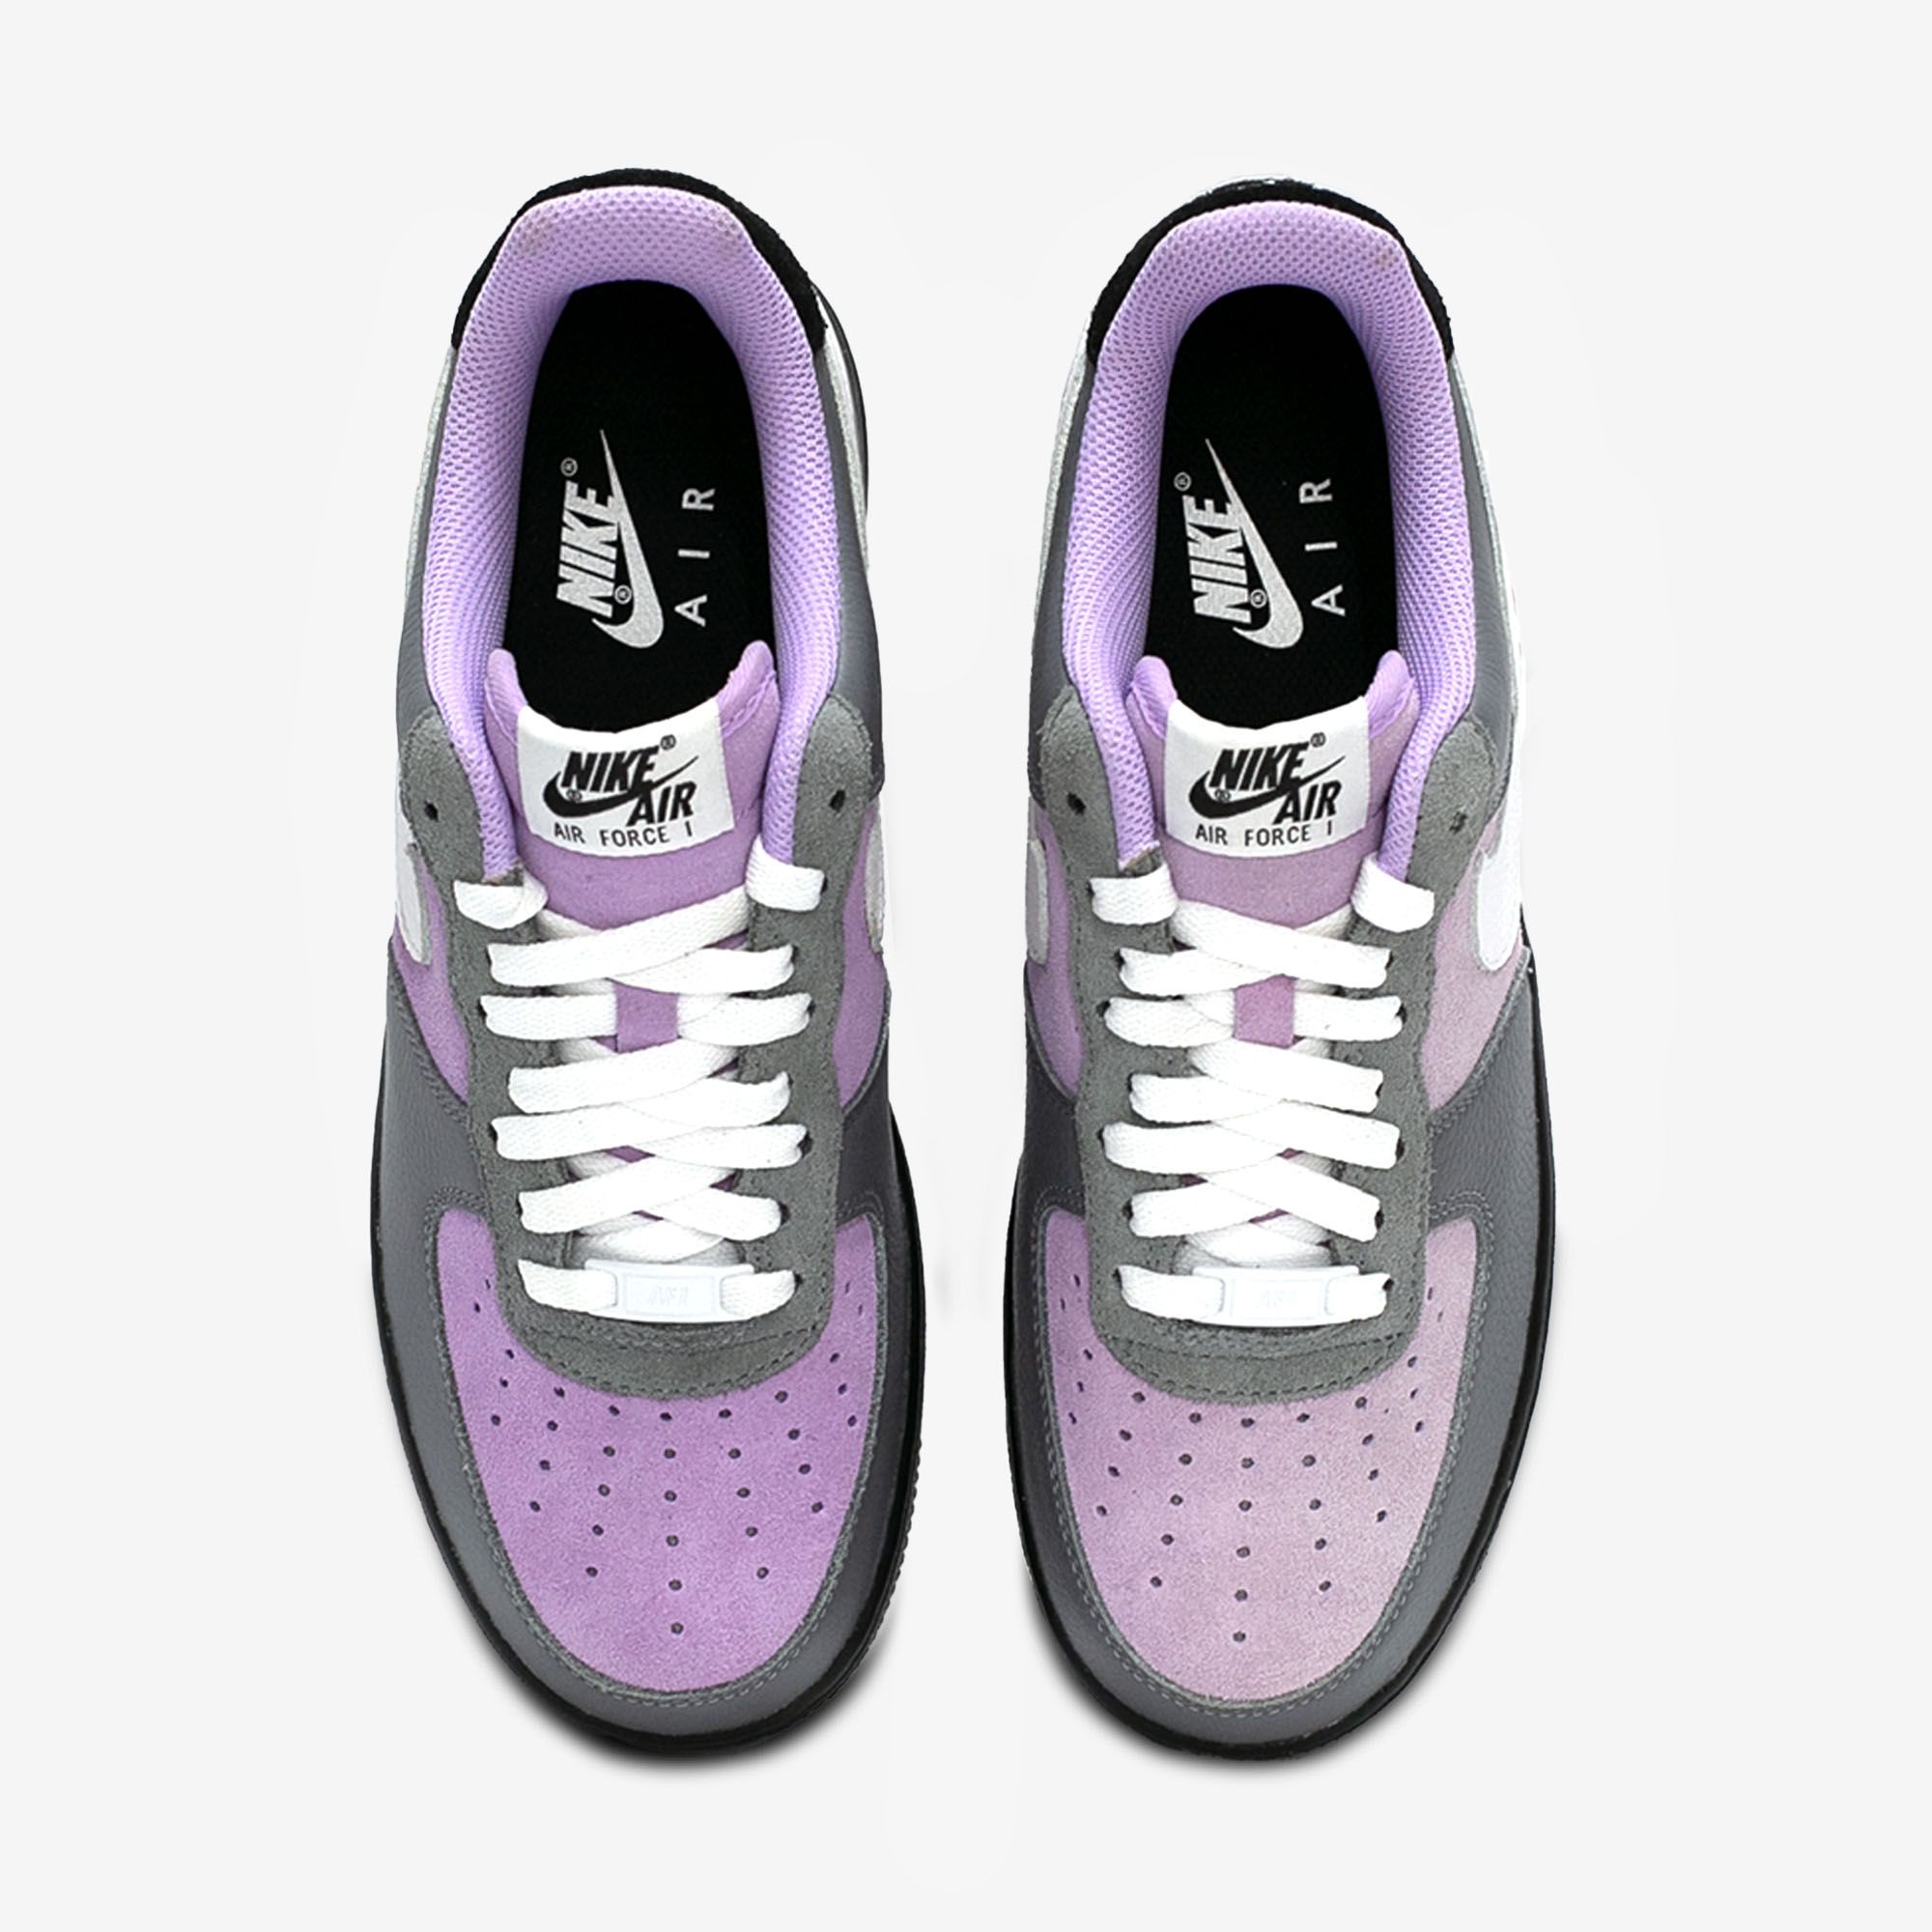  Nike Air Force 1 Low By You - Grey / Pink 